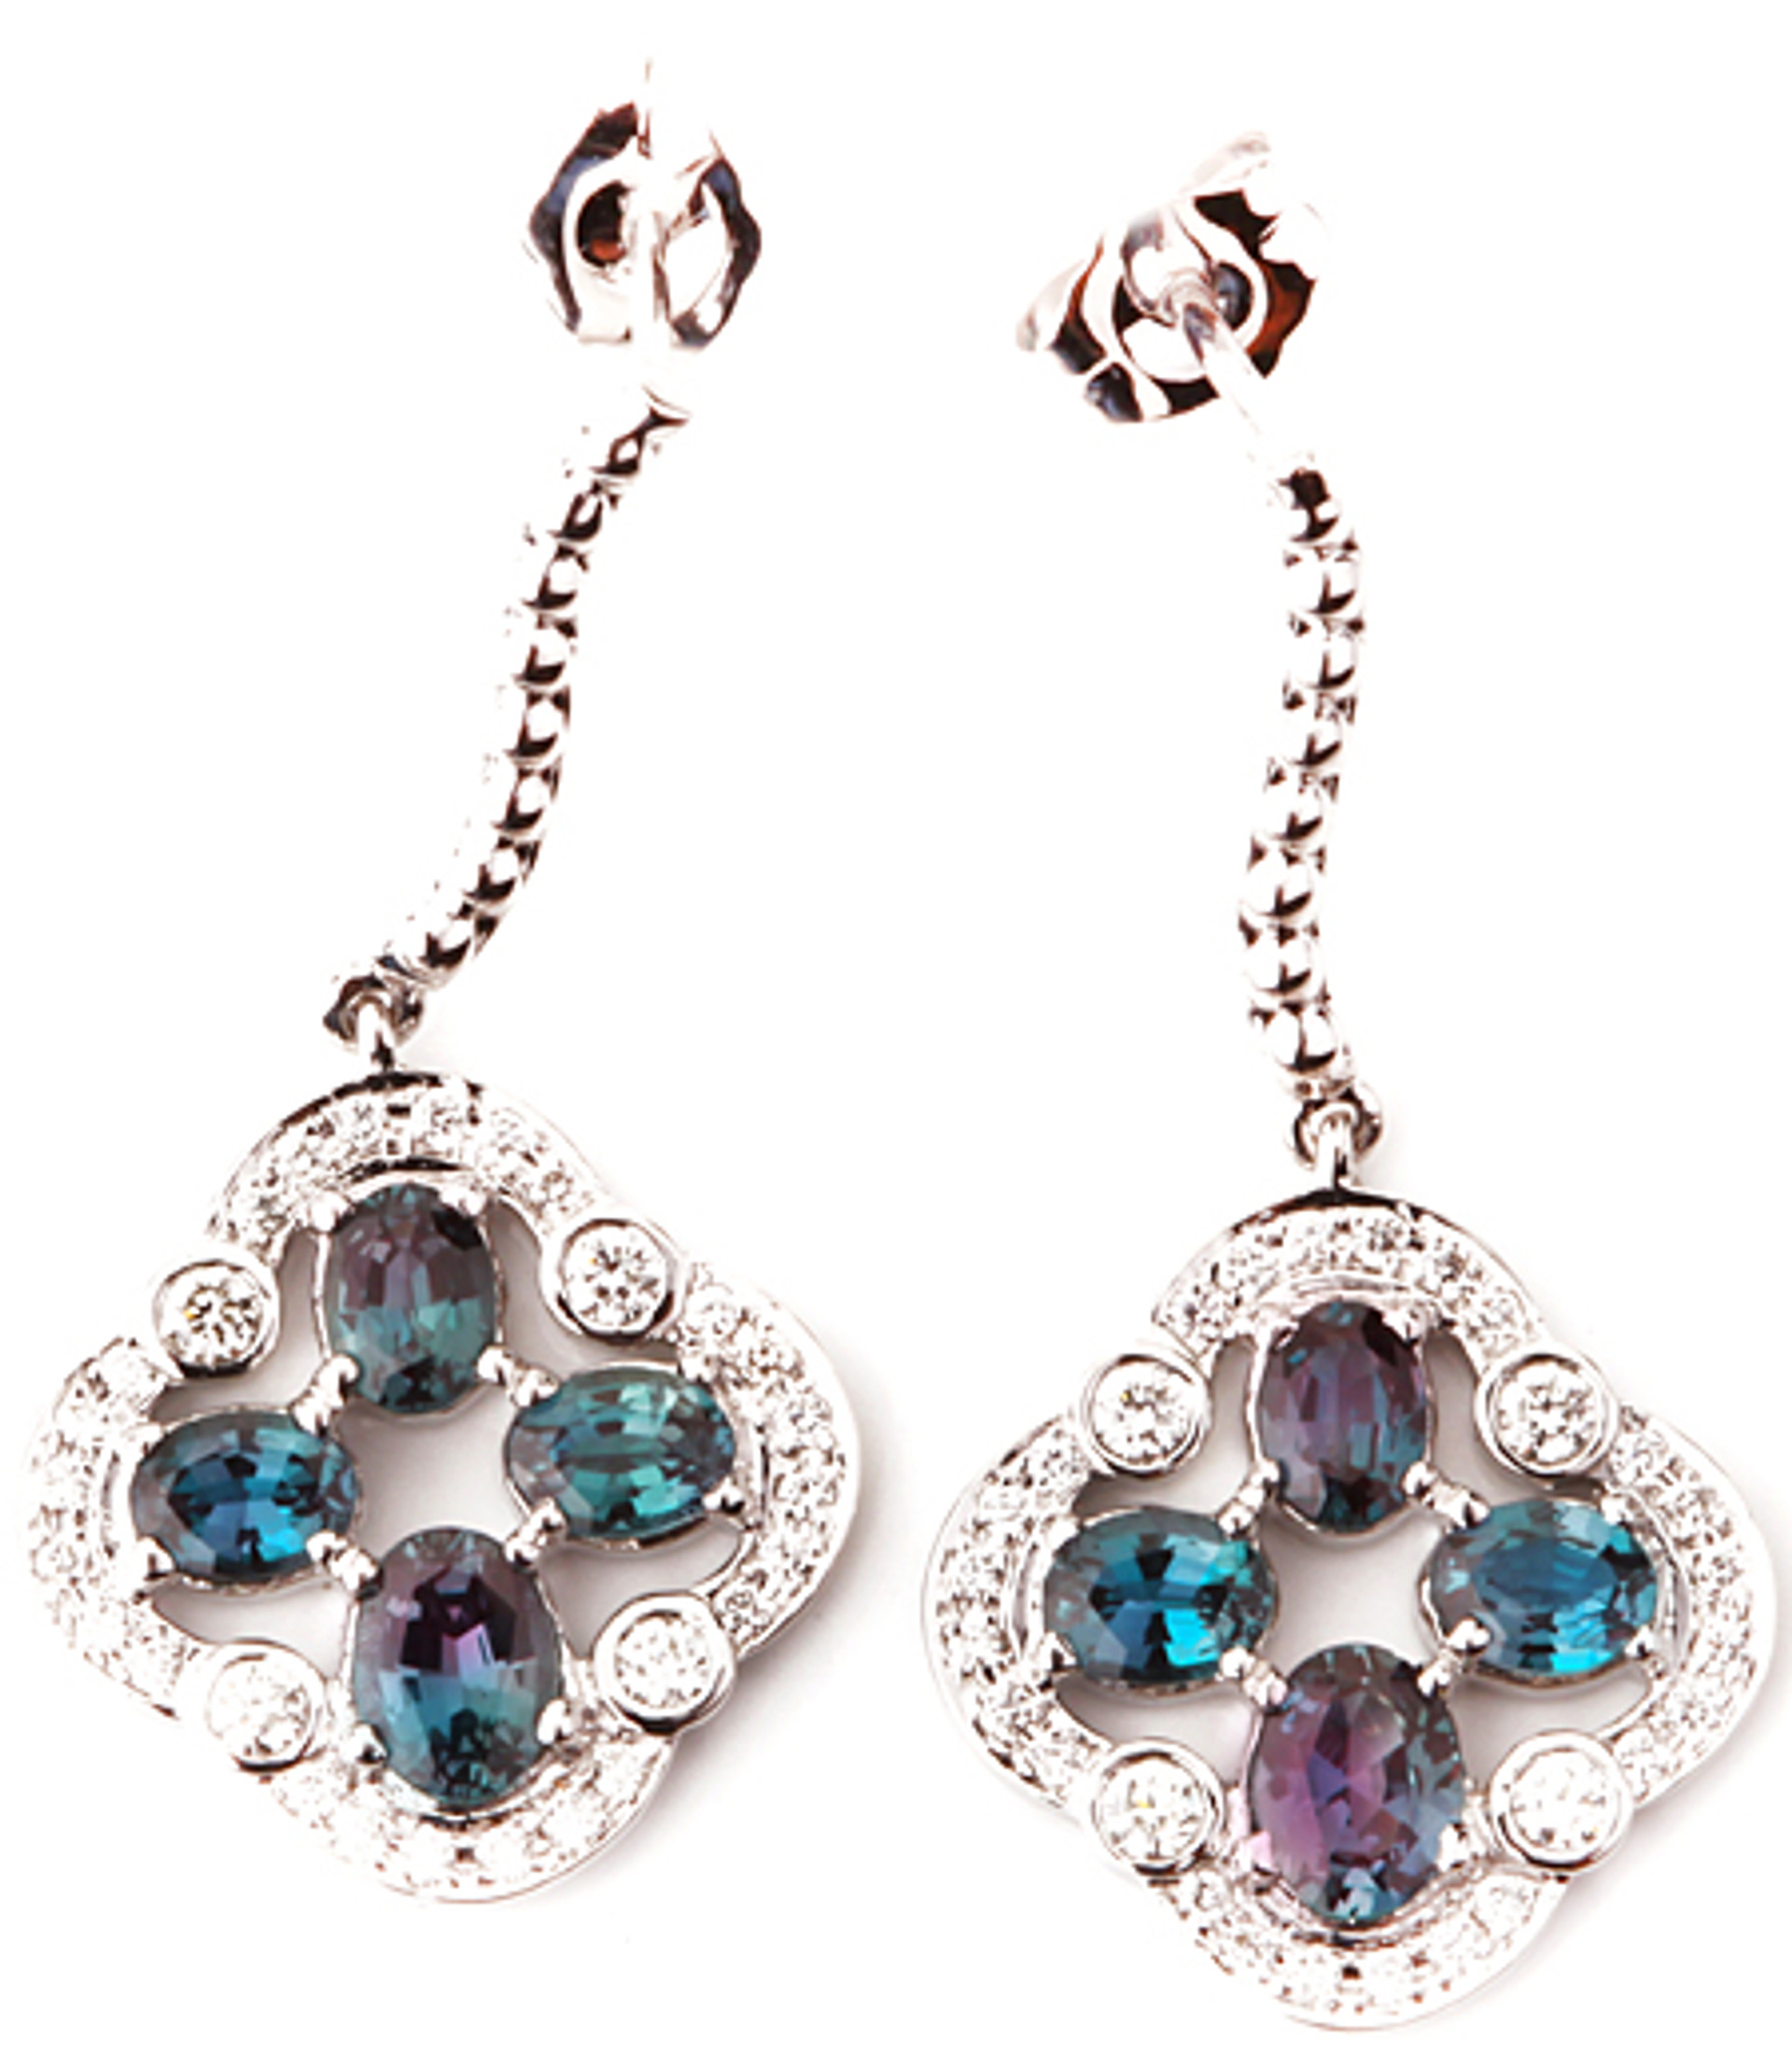 Real Alexandrite Moondrop Earrings With Pave Diamonds in 14 Karat White ...